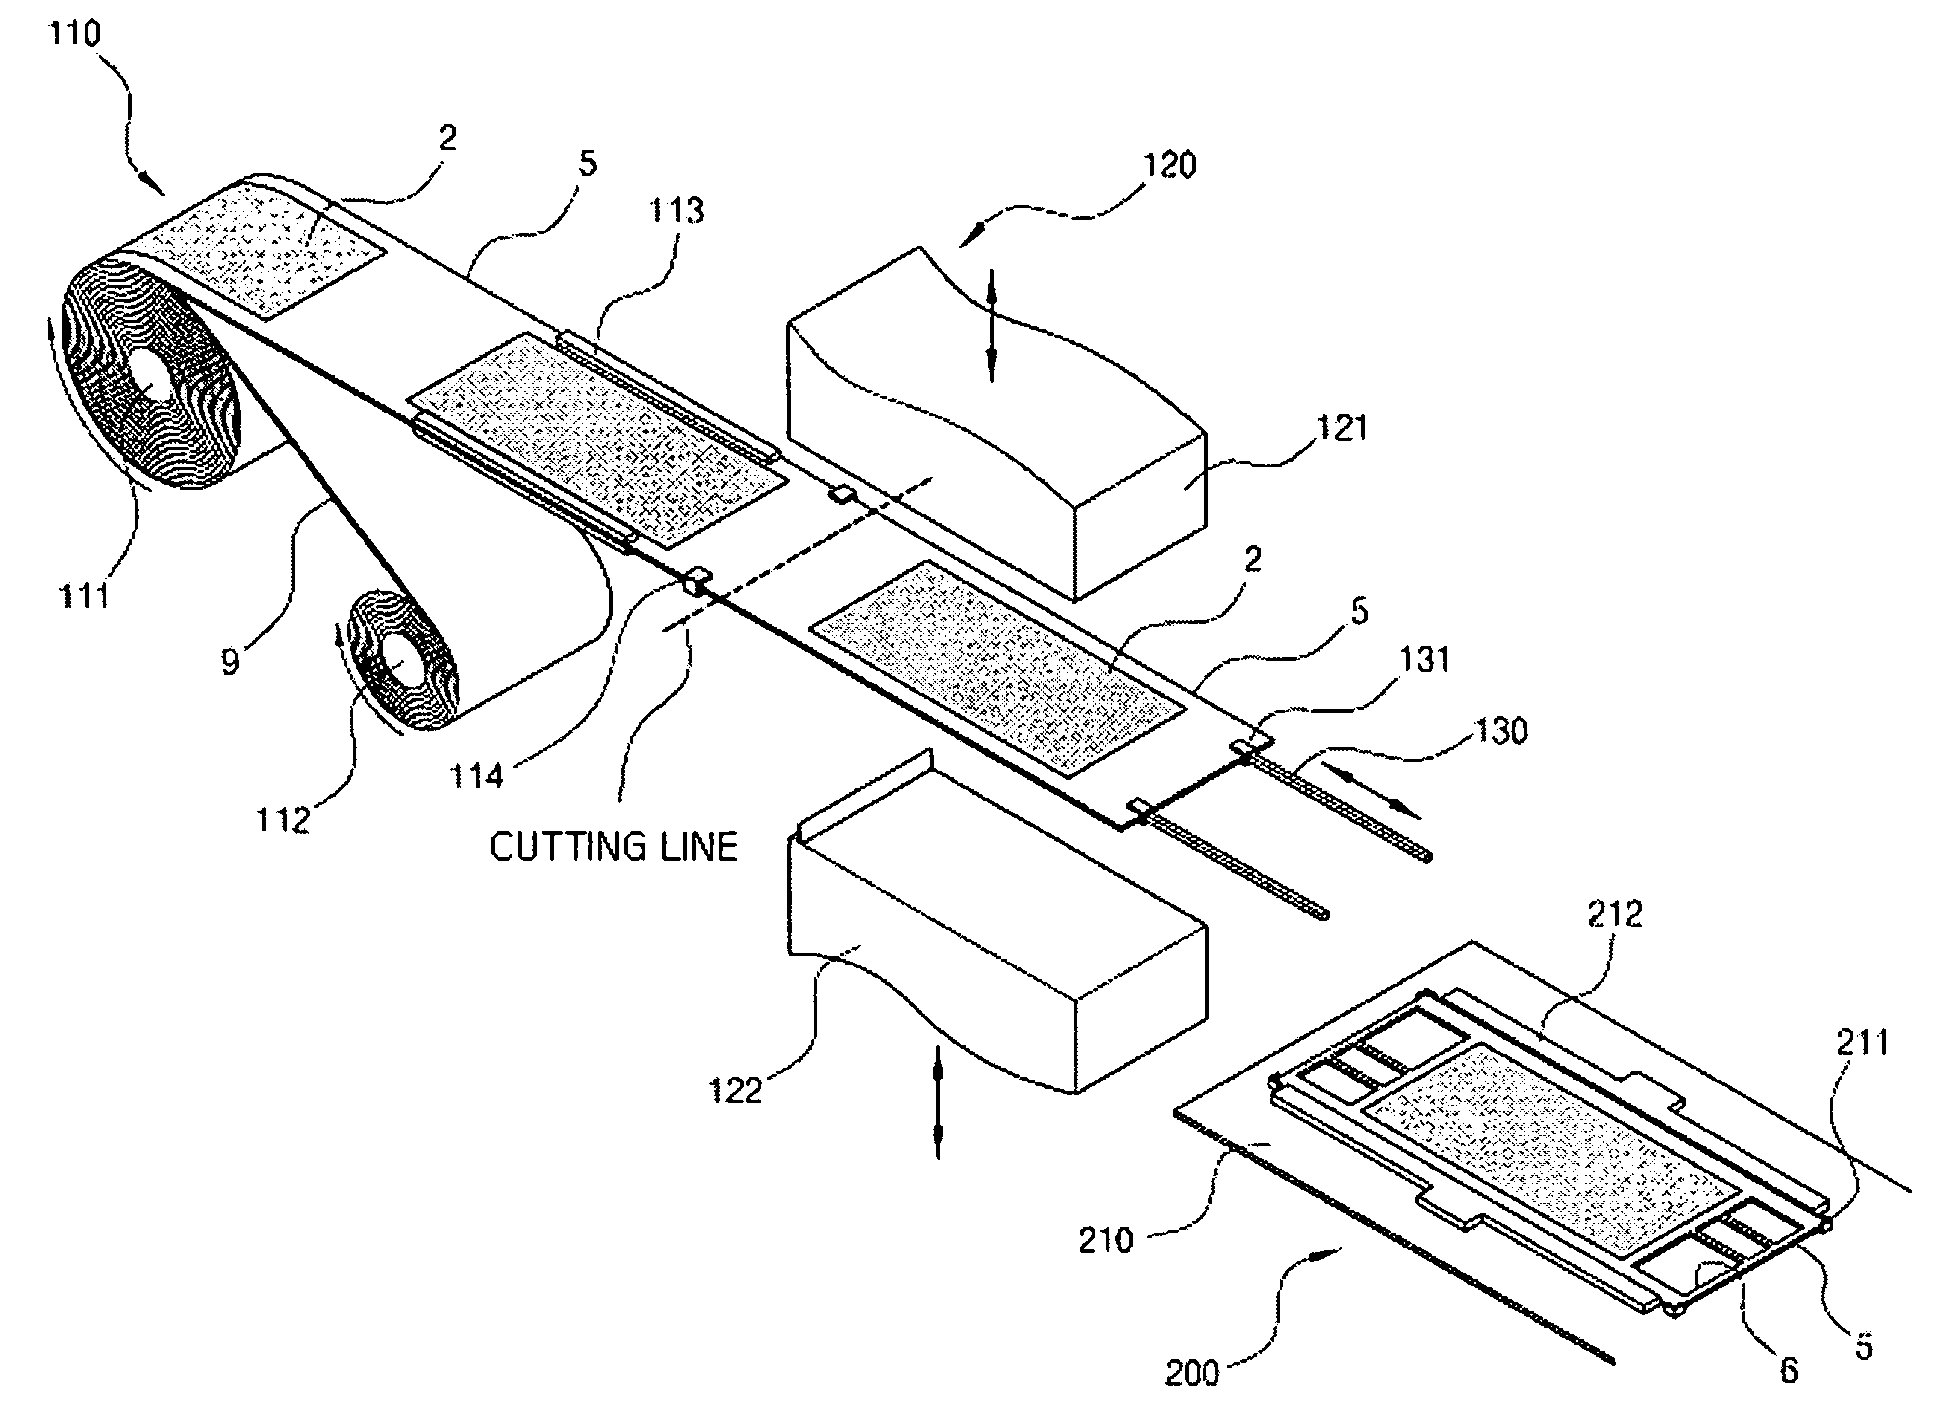 Apparatus for automatically punching and bonding MEA materials for fuel cell